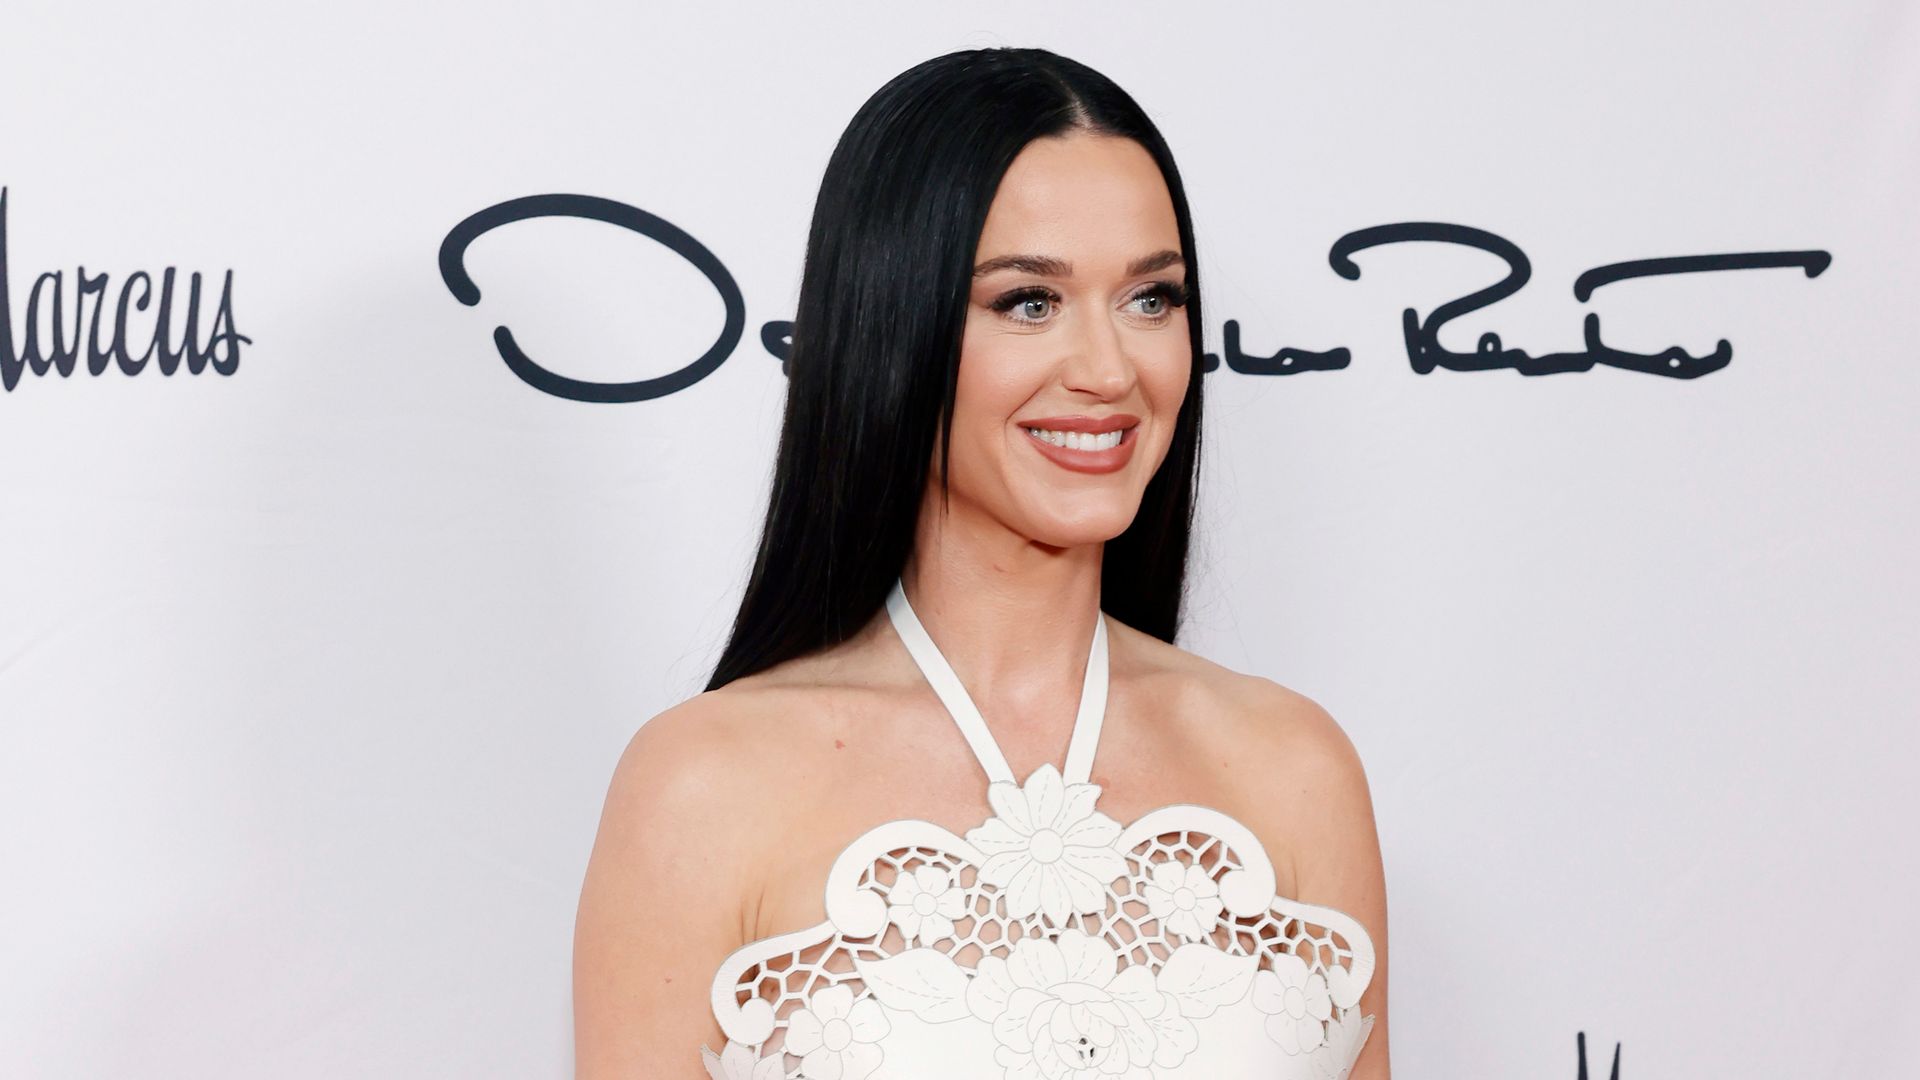 Katy Perry delights fans with unseen baby bump photos